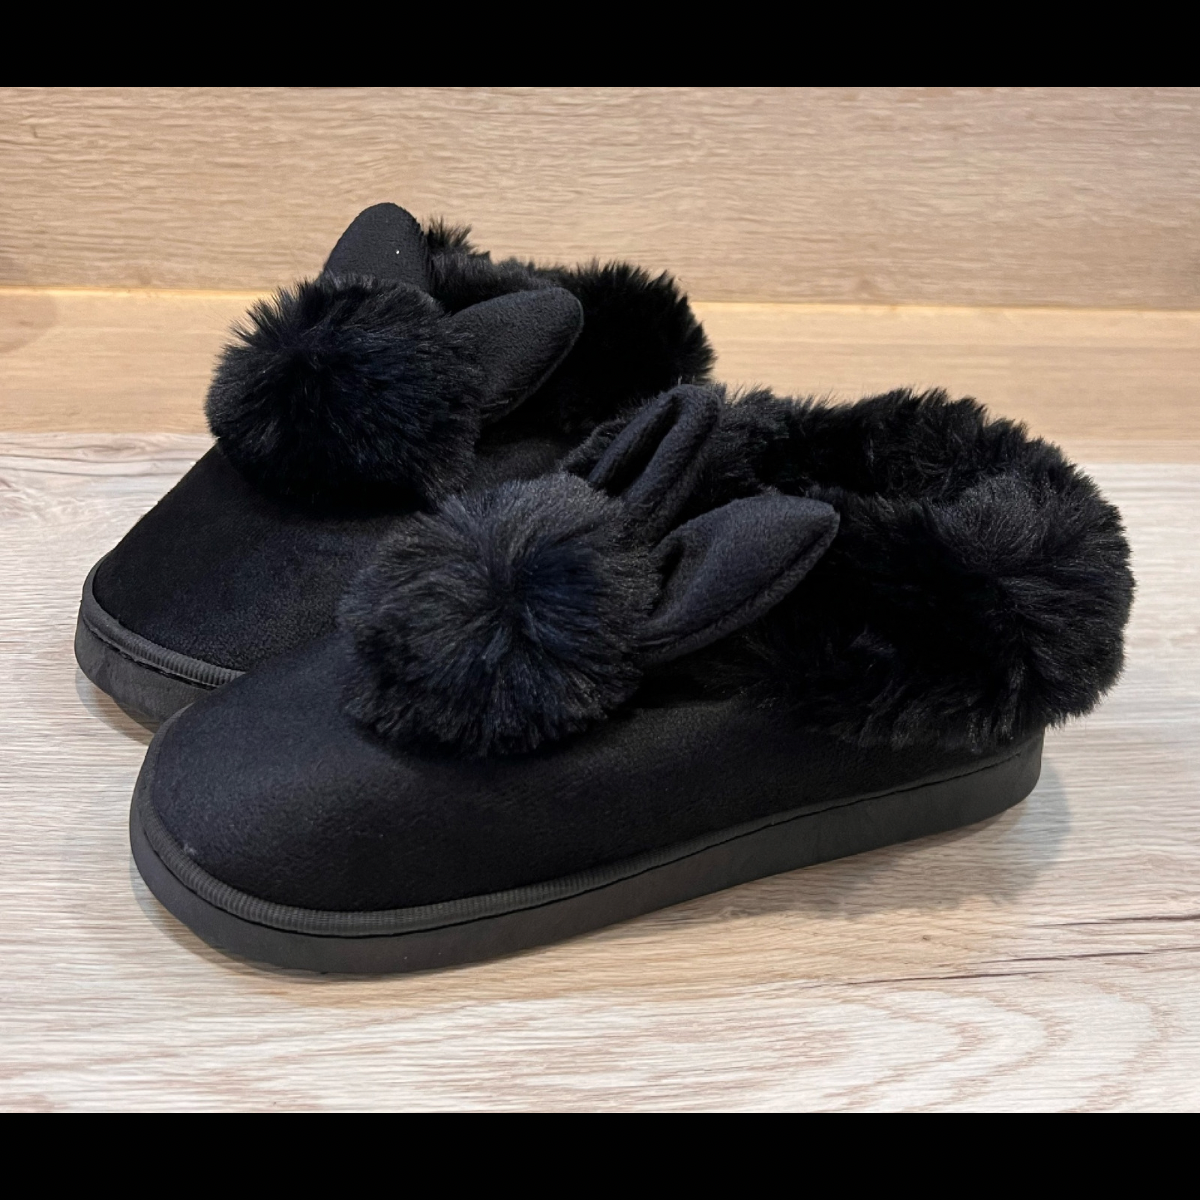 ROCKTHOSECURVES BLACK FULL FOOT SLIPPERS WITH BUNY EARS AND OUTDORR SOLE